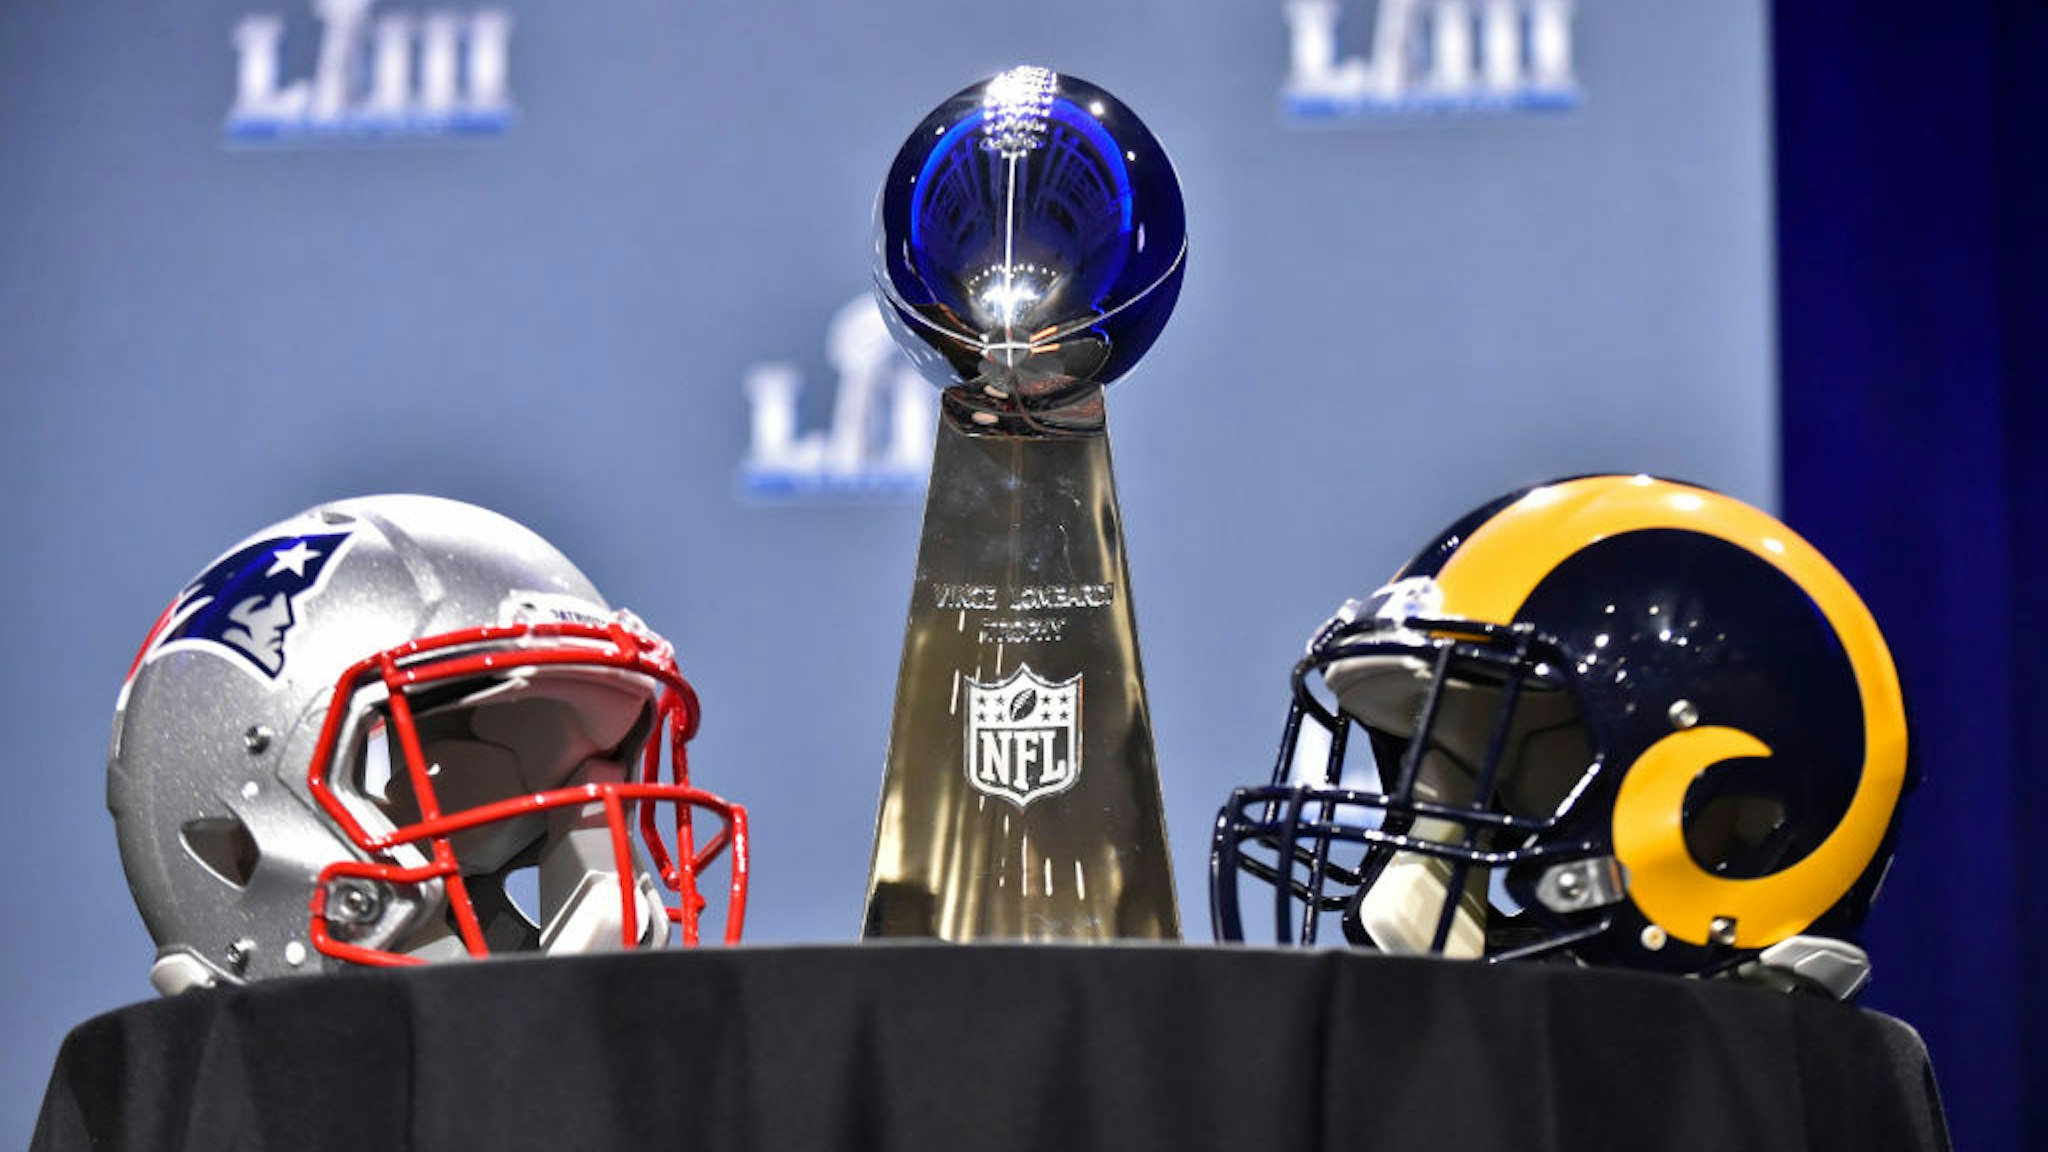 The Vince Lombardi Trophy sits on a table between the New England Patriots and Los Angeles Rams helmets prior to NFL Commissioner Roger Goodell's press conference at the Georgia World Congress Center on January 30, 2019, in Atlanta, GA.